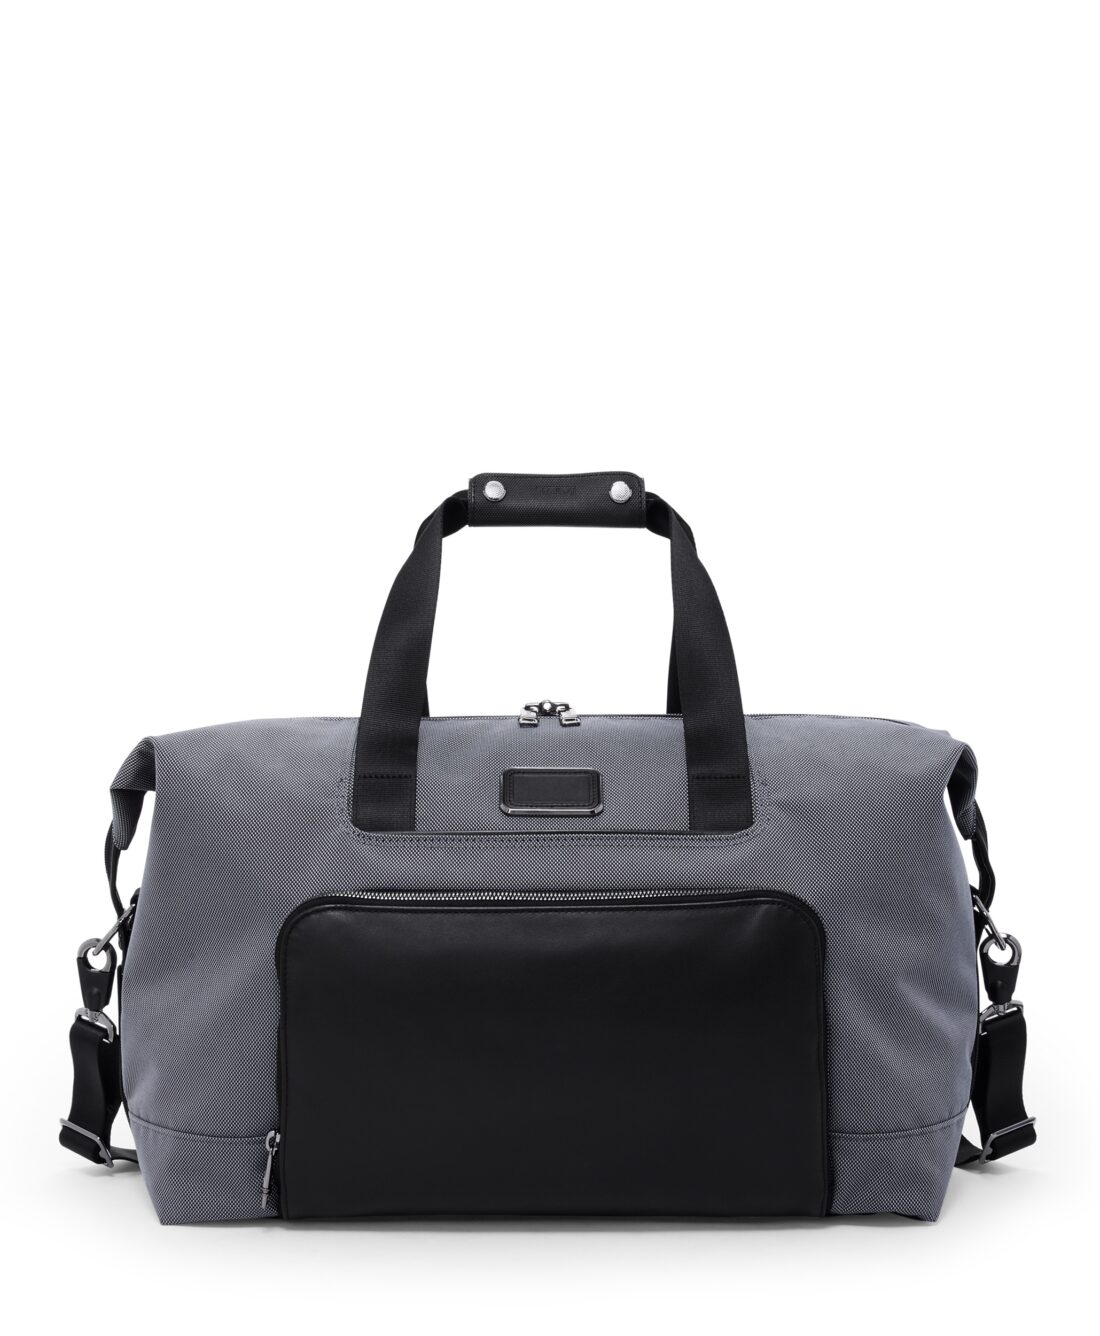 Alpha X Double Expansion Satchel in Meteor Grey.